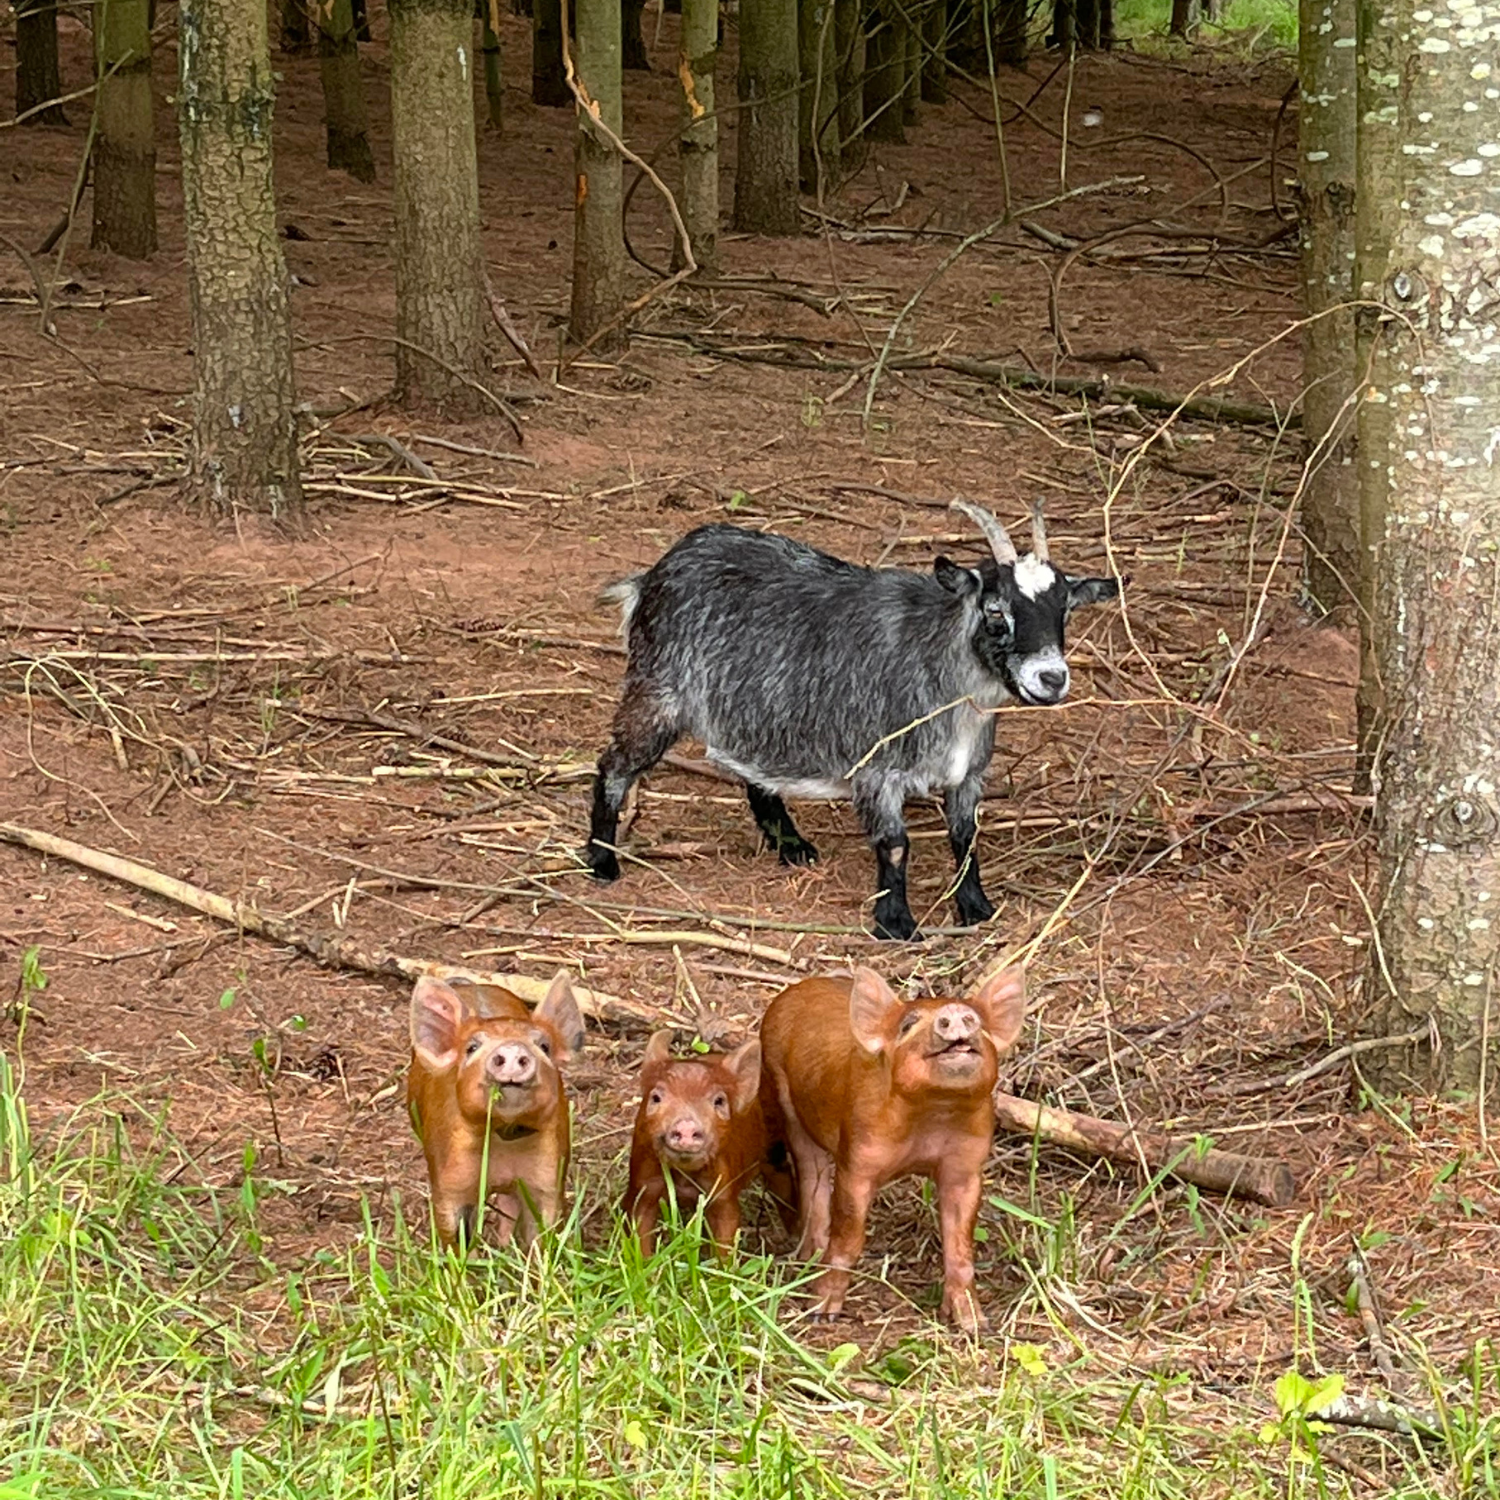 Previous Happening: Goats and piglets are here!